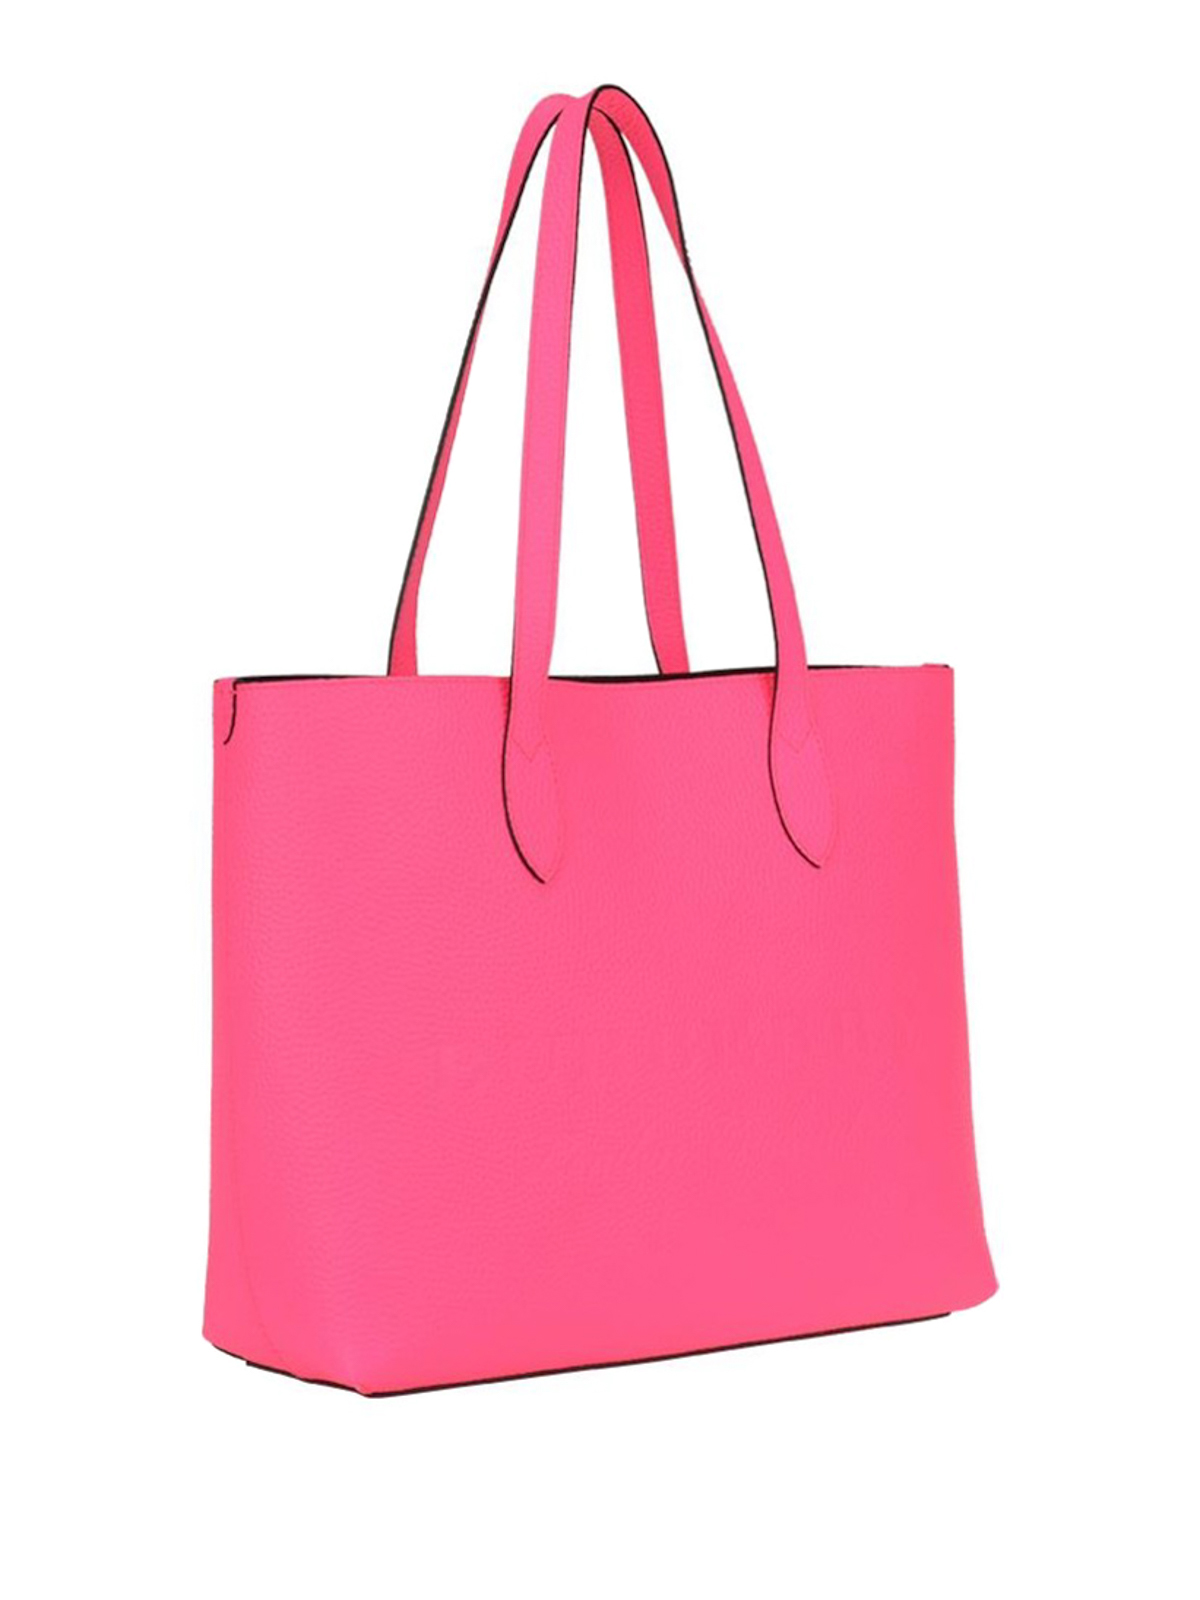 Burberry Pink Tote Bags